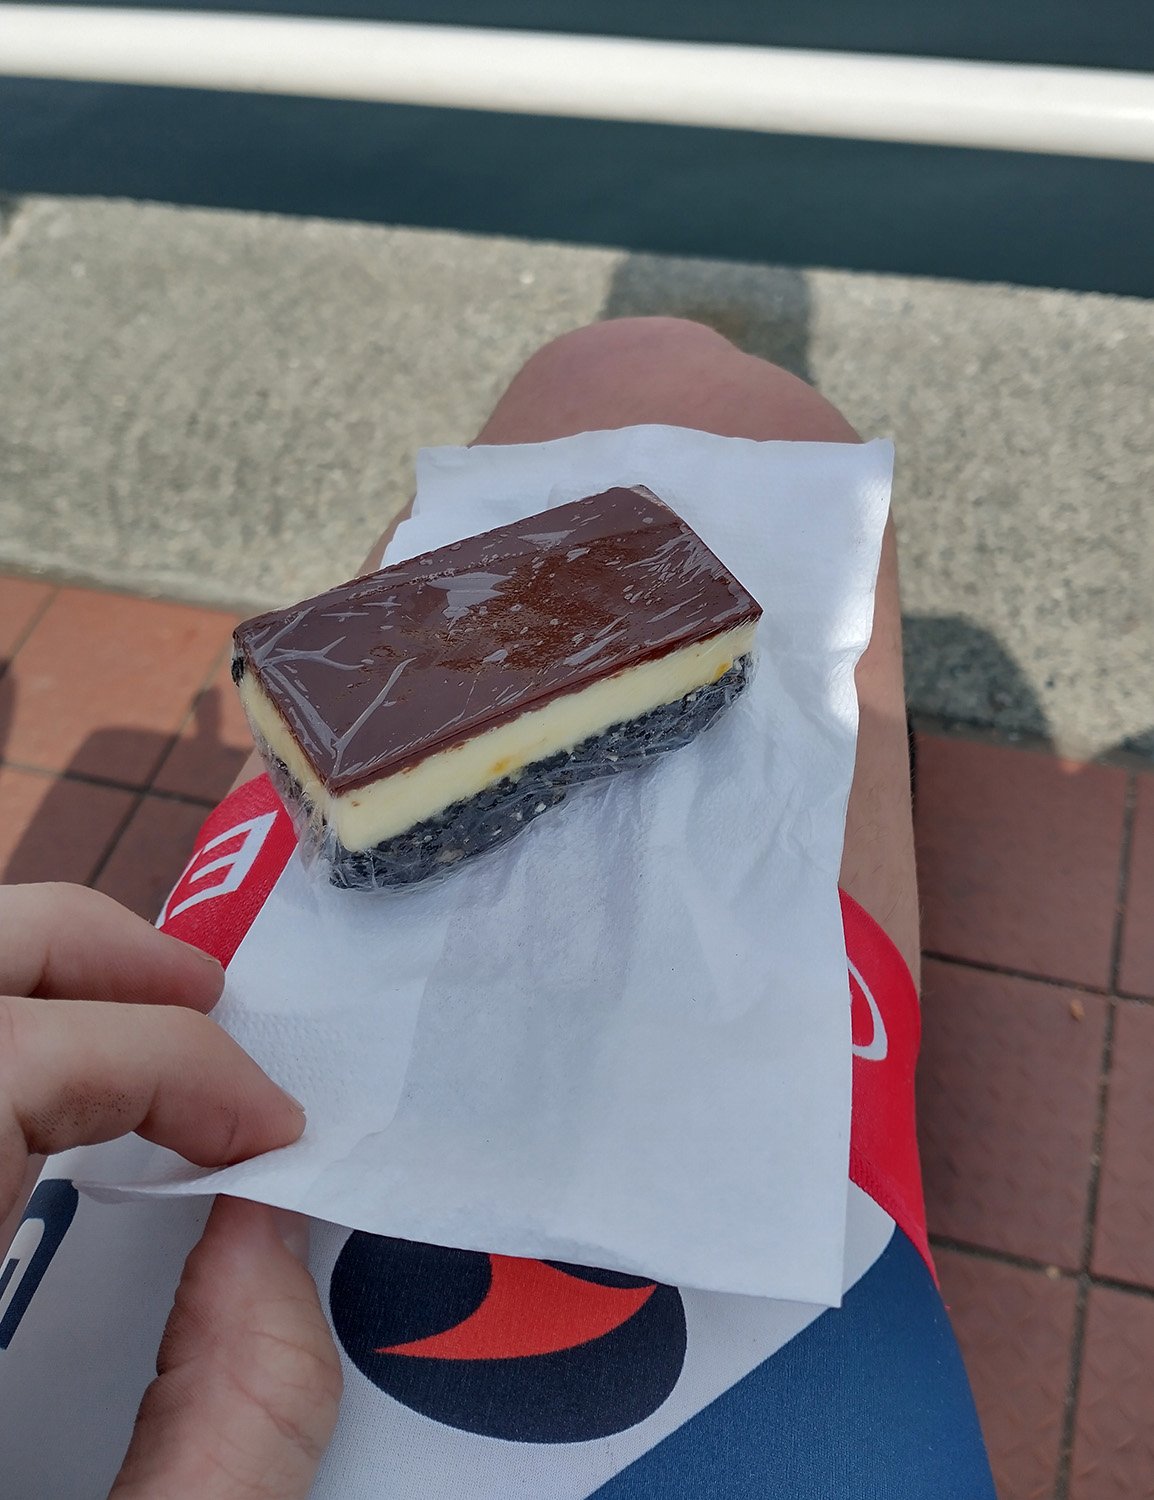  I still got a god damned Nanaimo bar though. The place I wanted to go to was closed at 4pm on a Sunday. Why. 